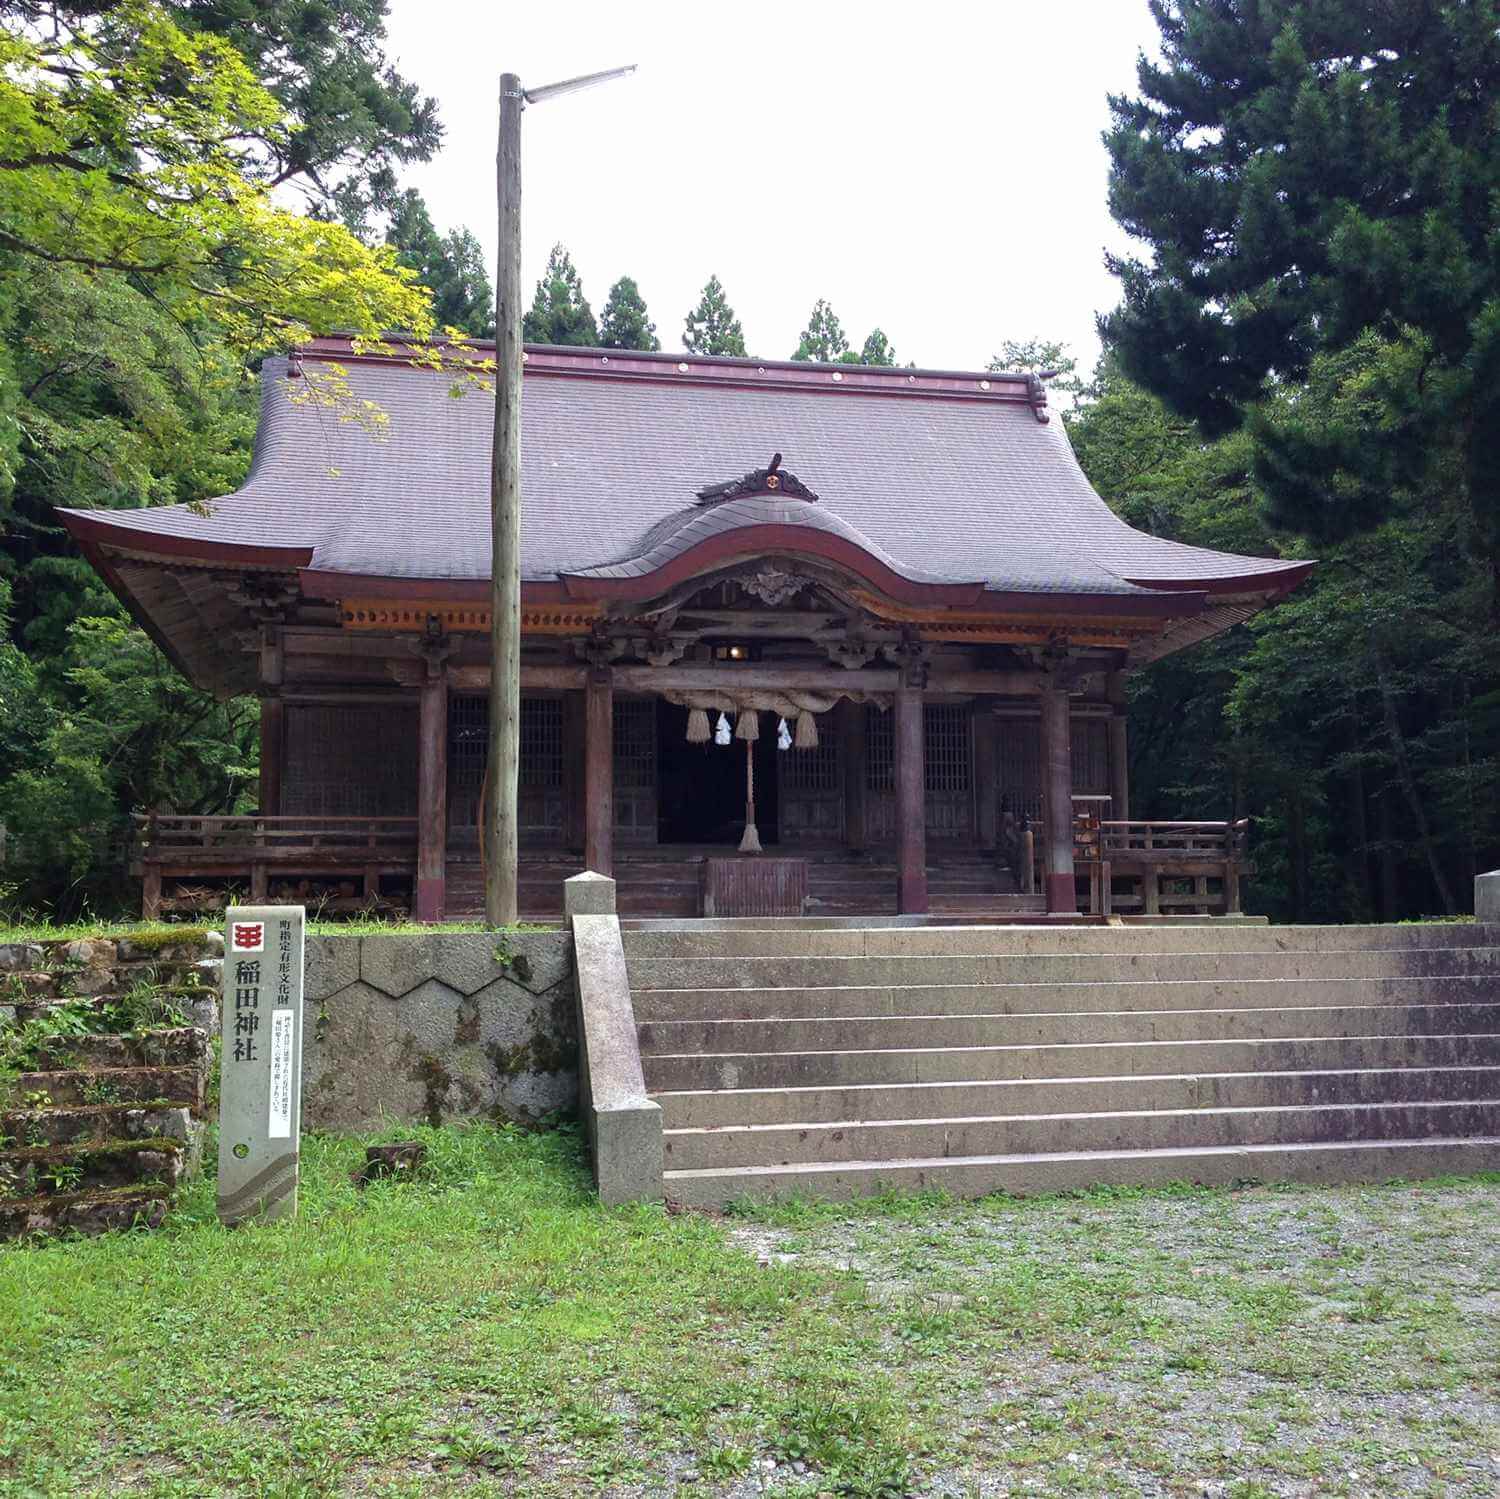 Inata Jinja in Okuizumo, located in the mountains about 1 hour and 30 minutes by car from Izumo Taisha Shrine